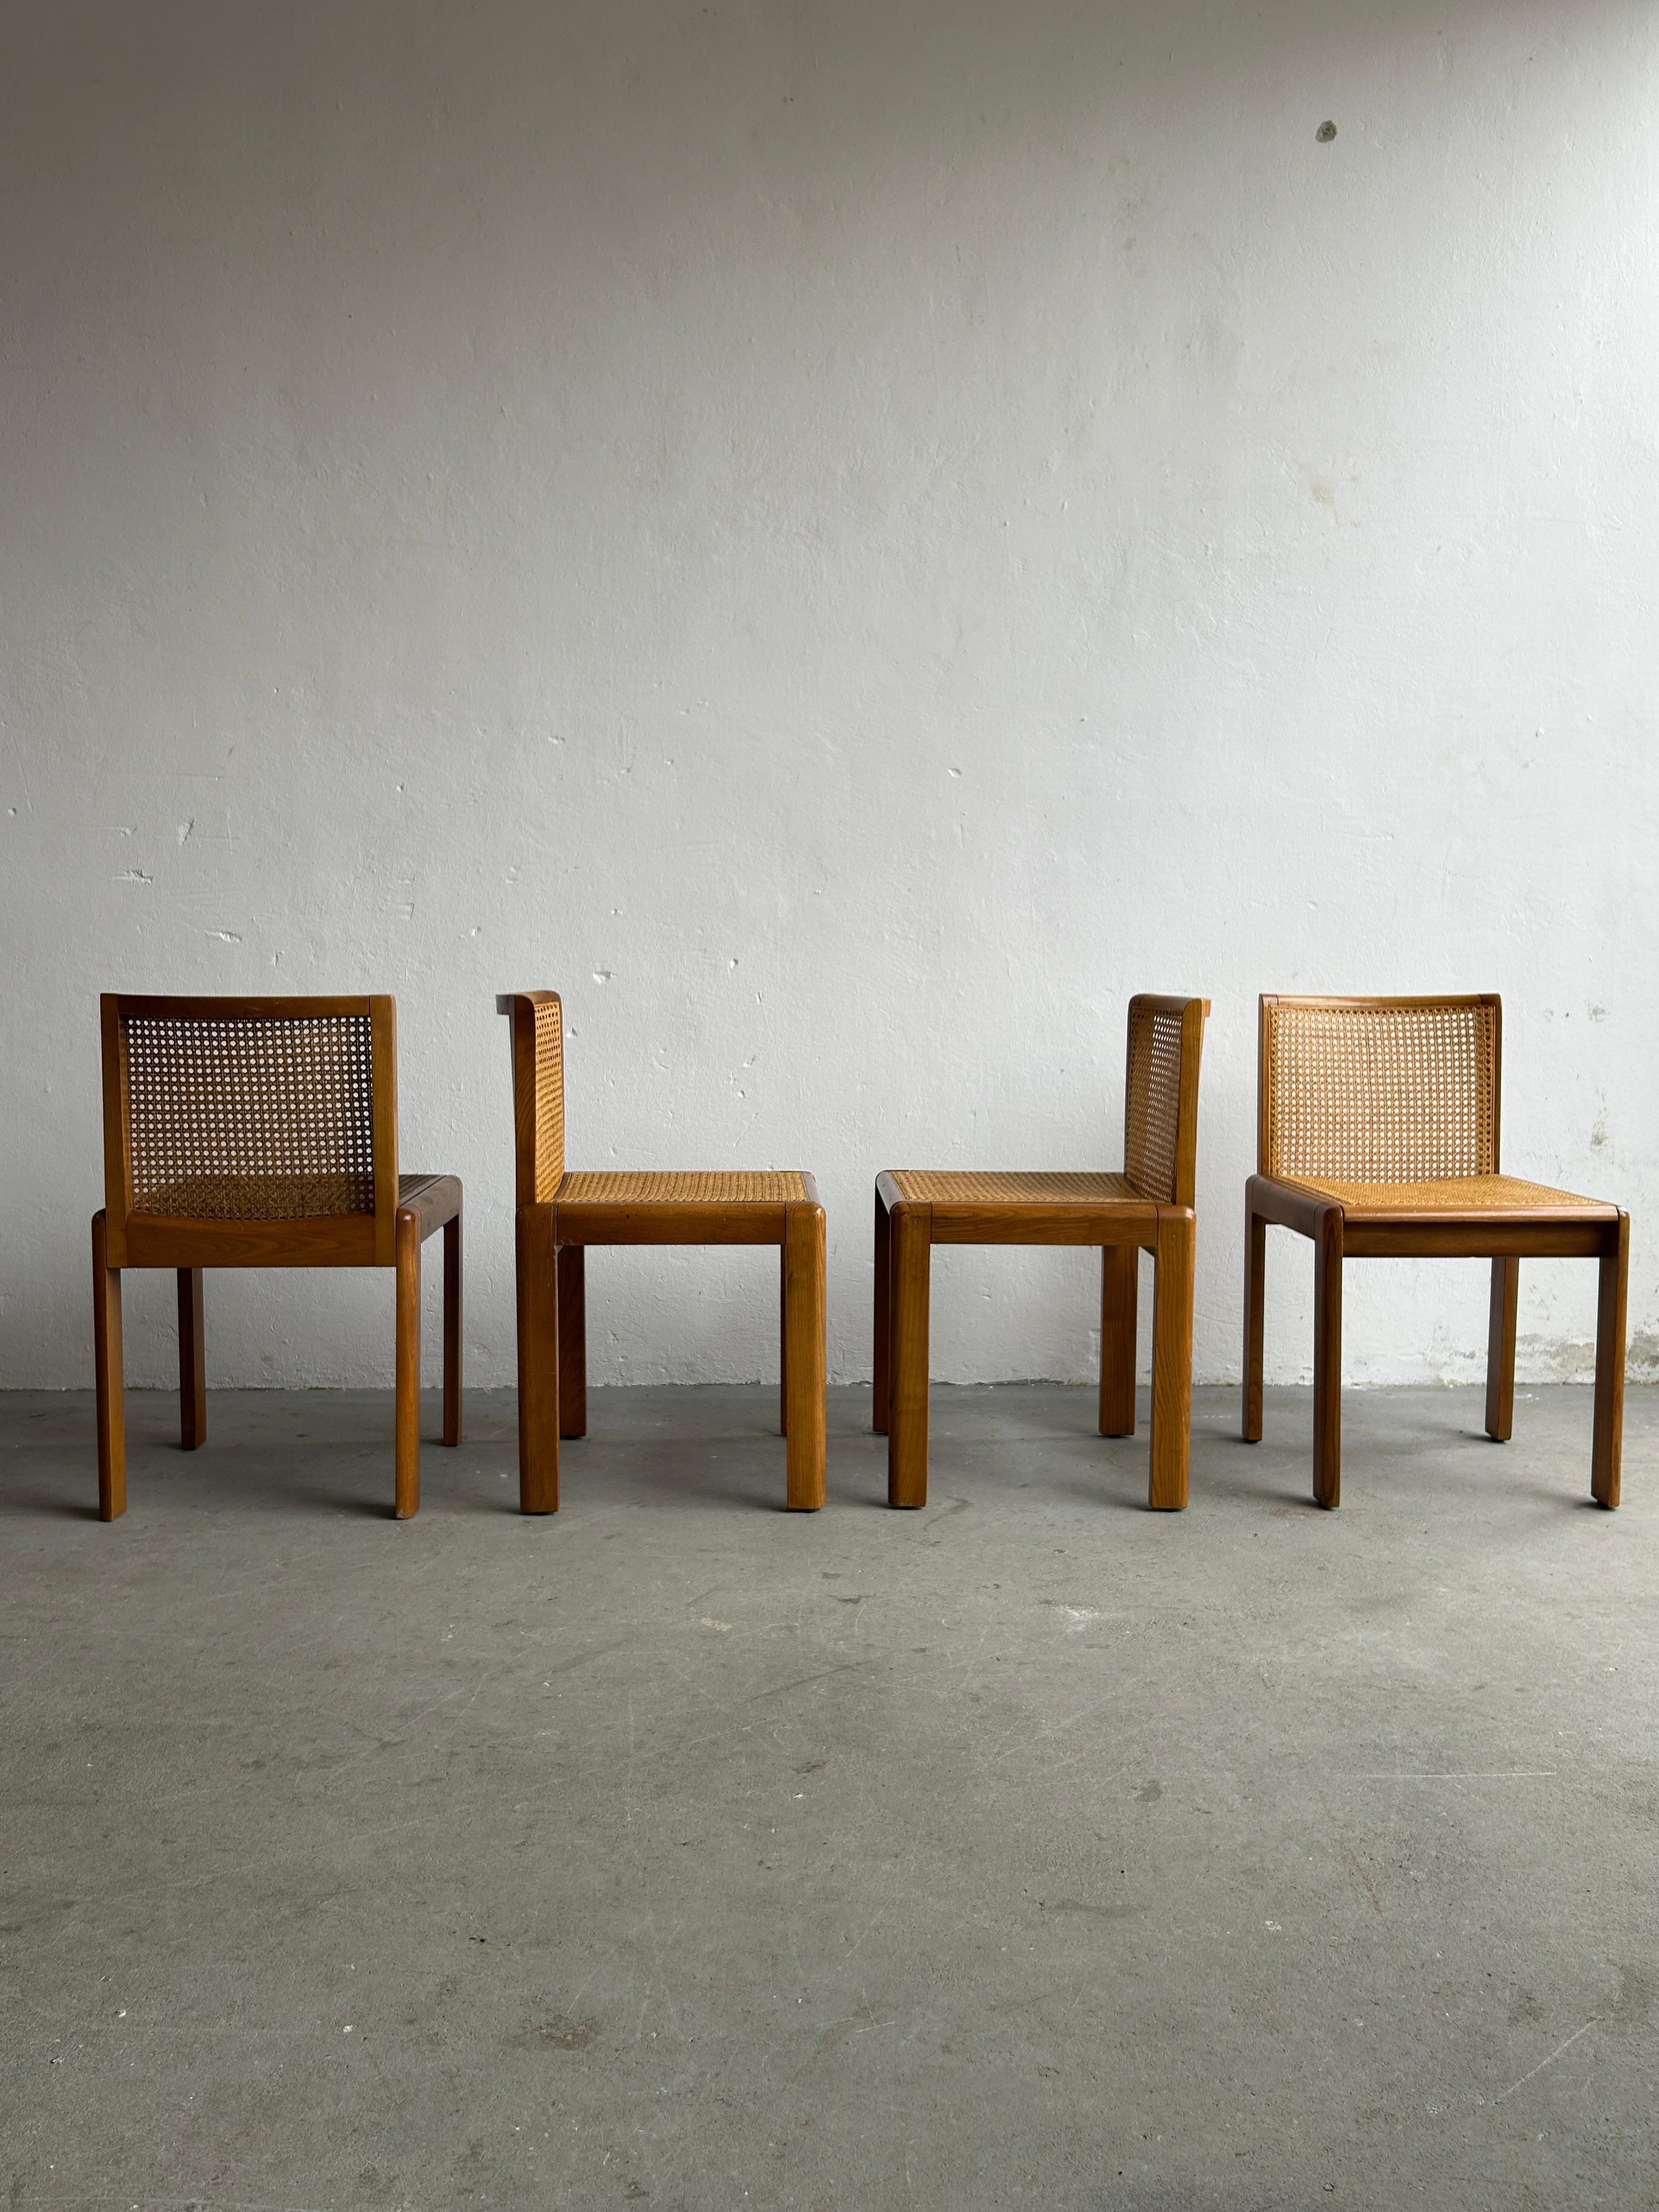 Late 20th Century Vintage Italian 1970s Mid-Century Modern Wooden Dining Chairs in Oak and Cane